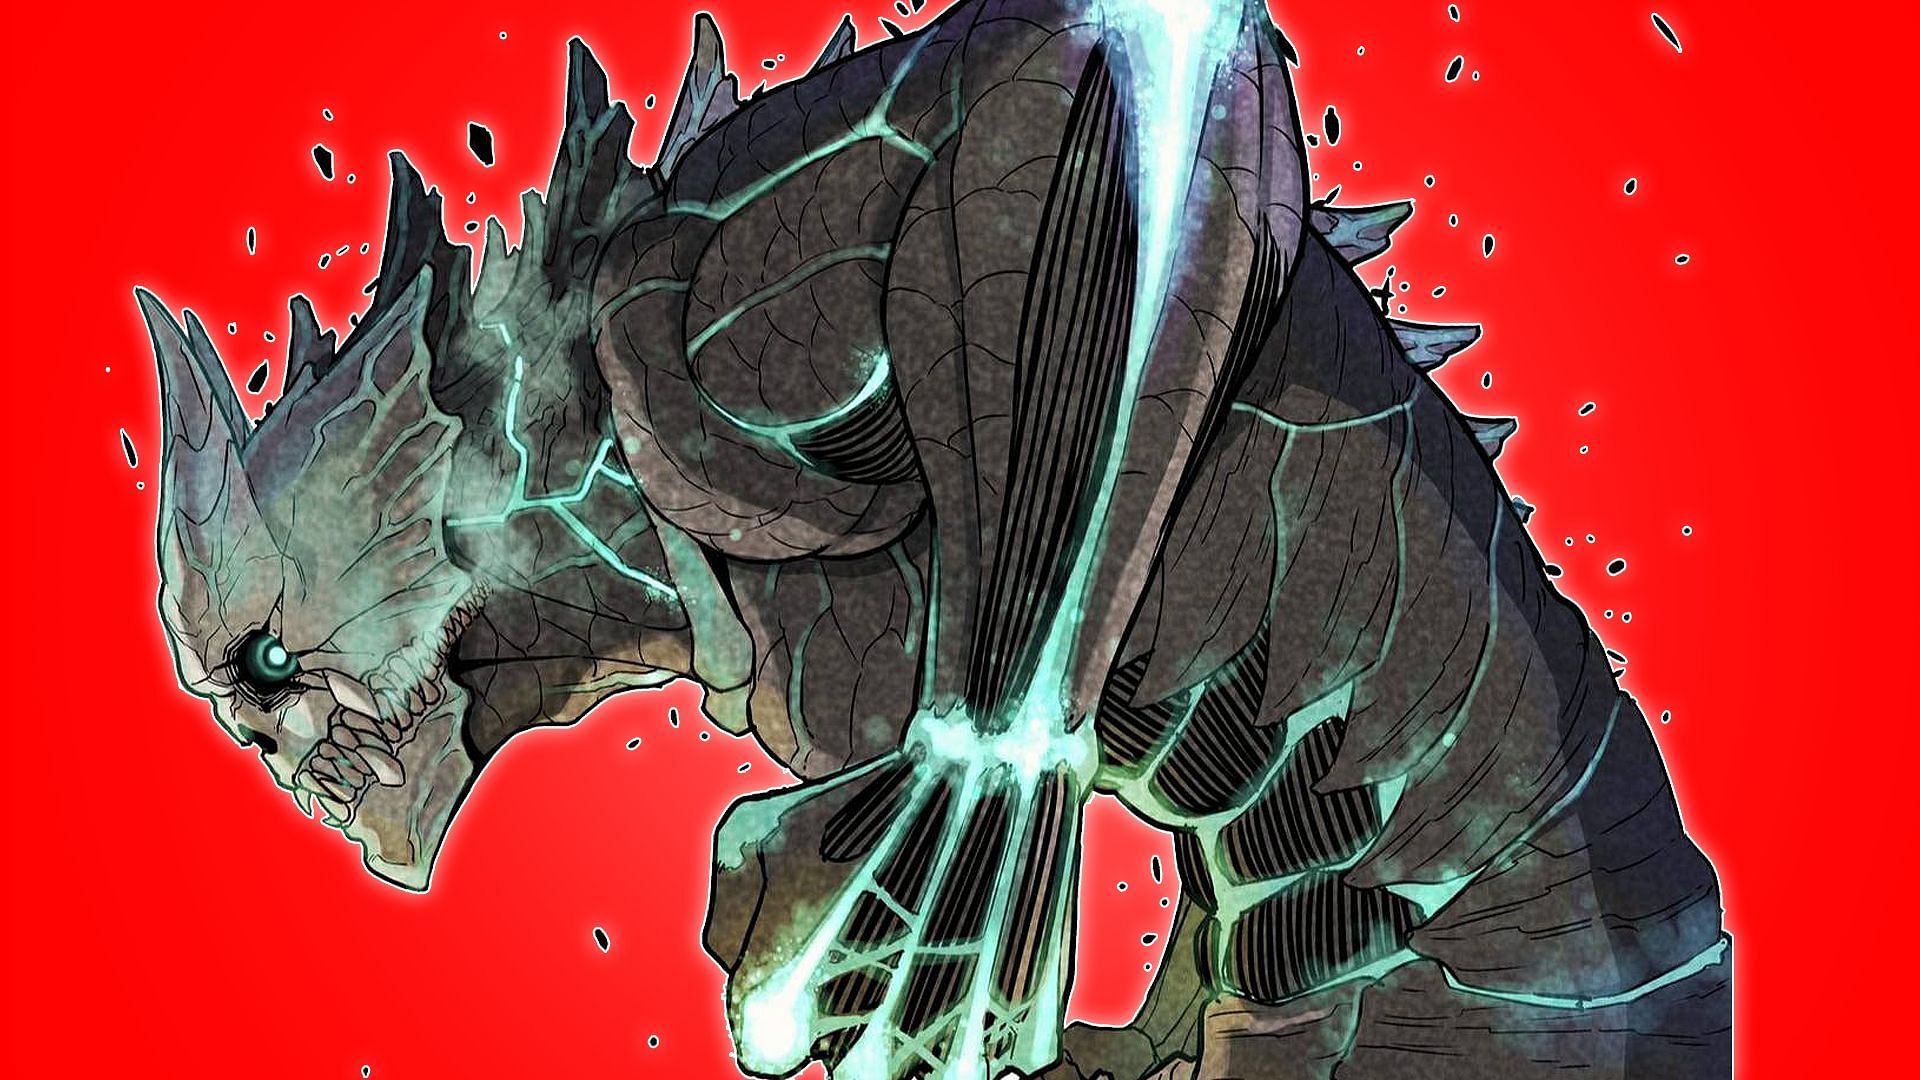 Kaiju No. 8 chapter 89: Release date and time, countdown, what to expect, and more (Image via Shueisha)